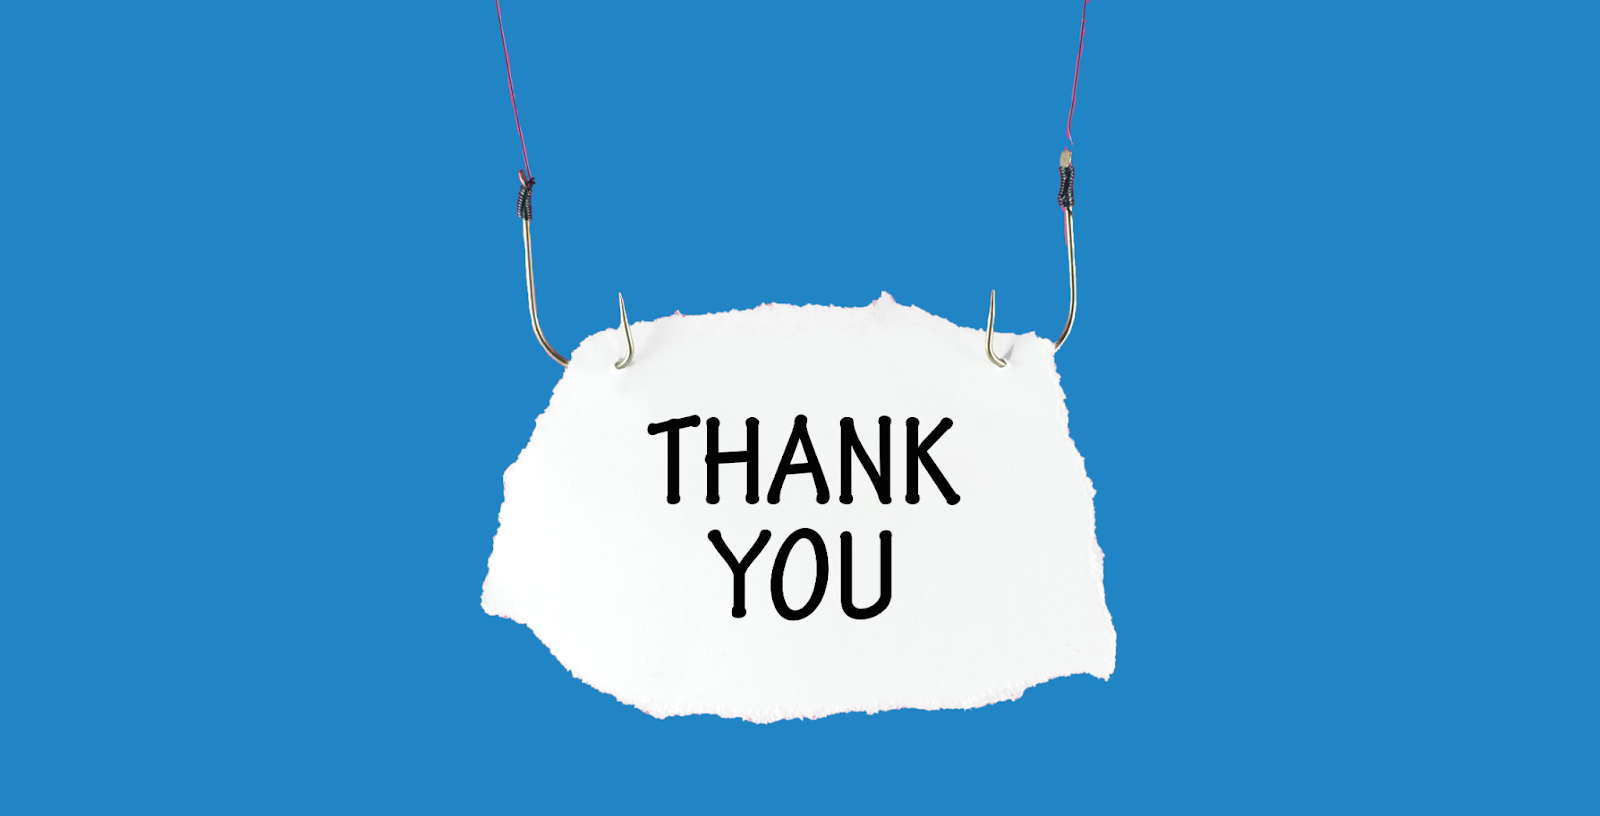 A piece of paper stating Thank You hangs from two fishing hooks against a blue background
